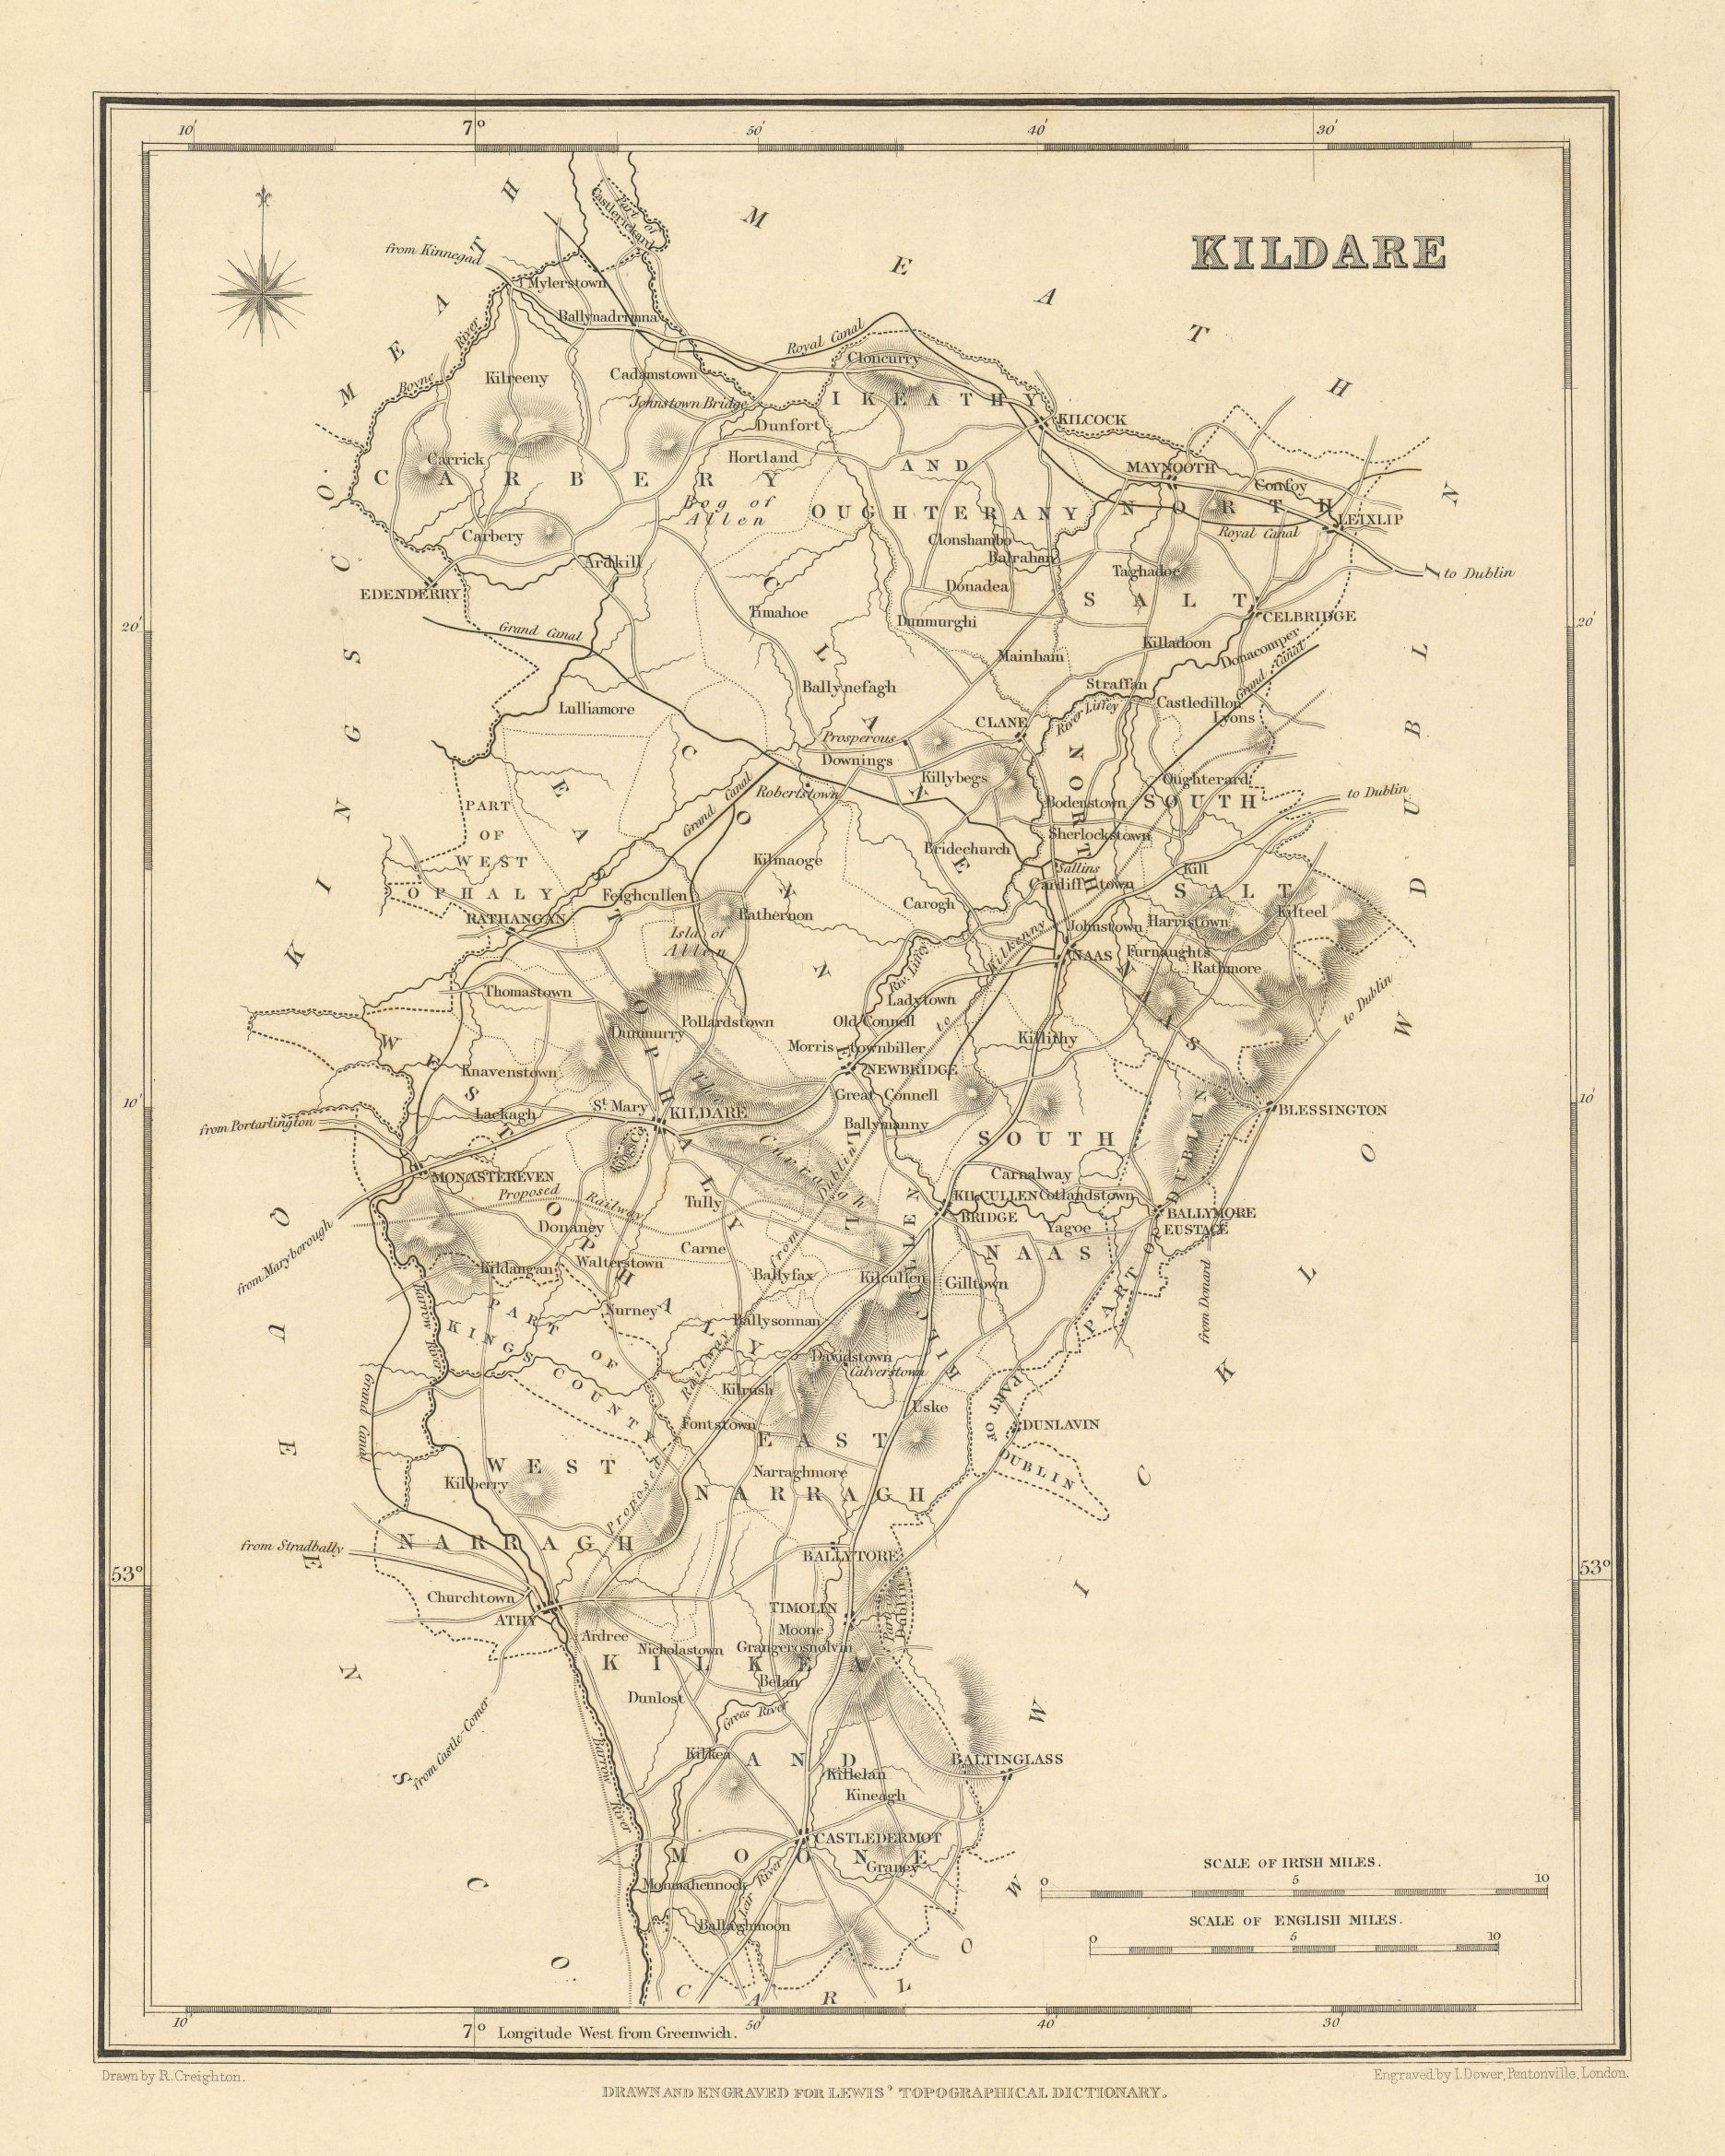 COUNTY KILDARE antique map for LEWIS by CREIGHTON & DOWER - Ireland 1837